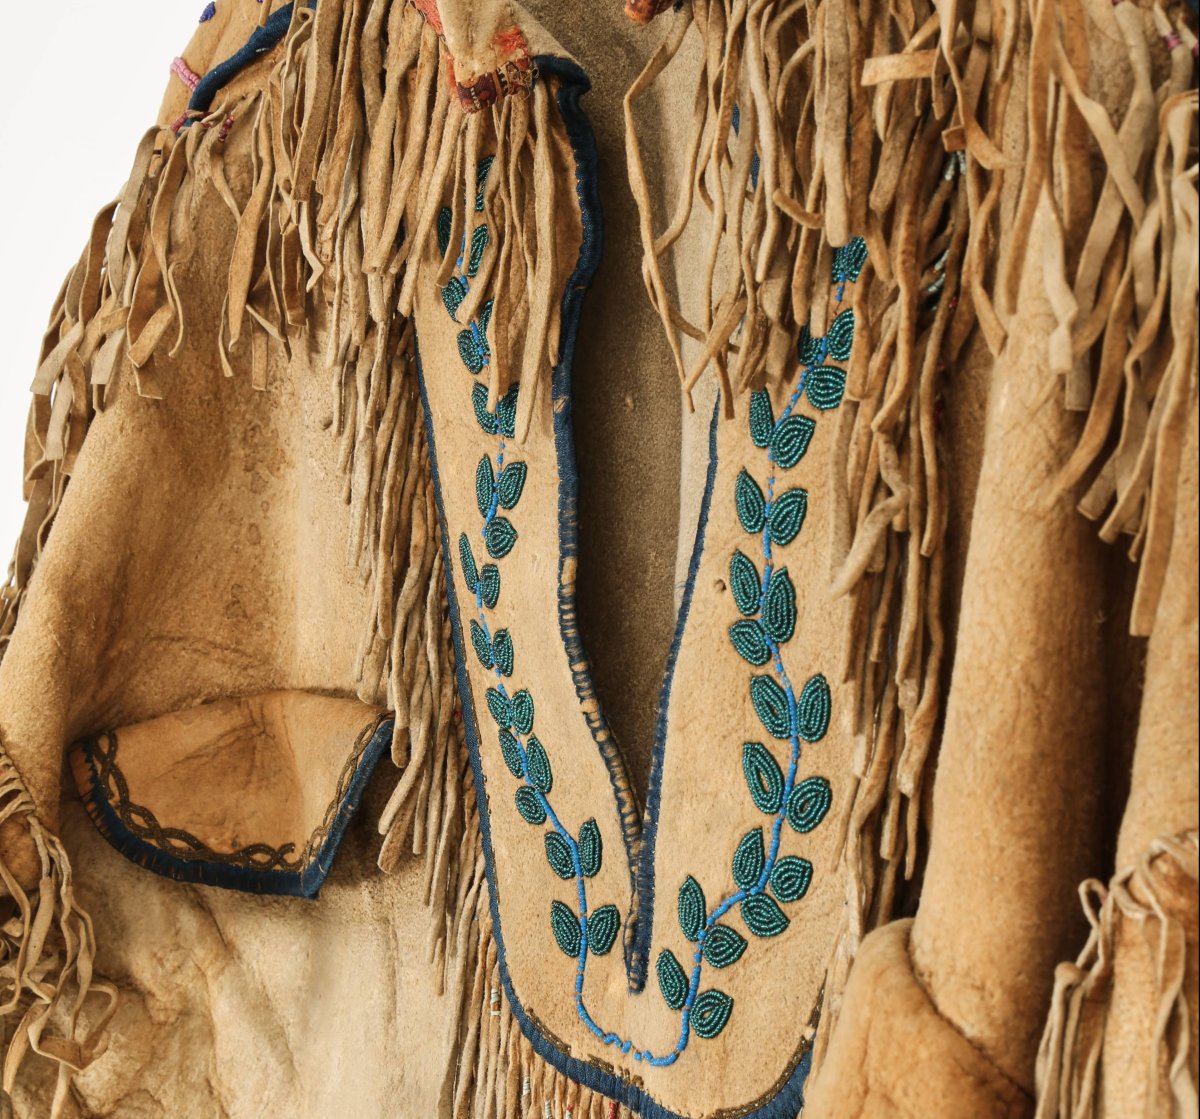 This jacket, believed to be around 170 years old, was found at a vintage clothing business in the UK, and it may have origins in Manitoba.